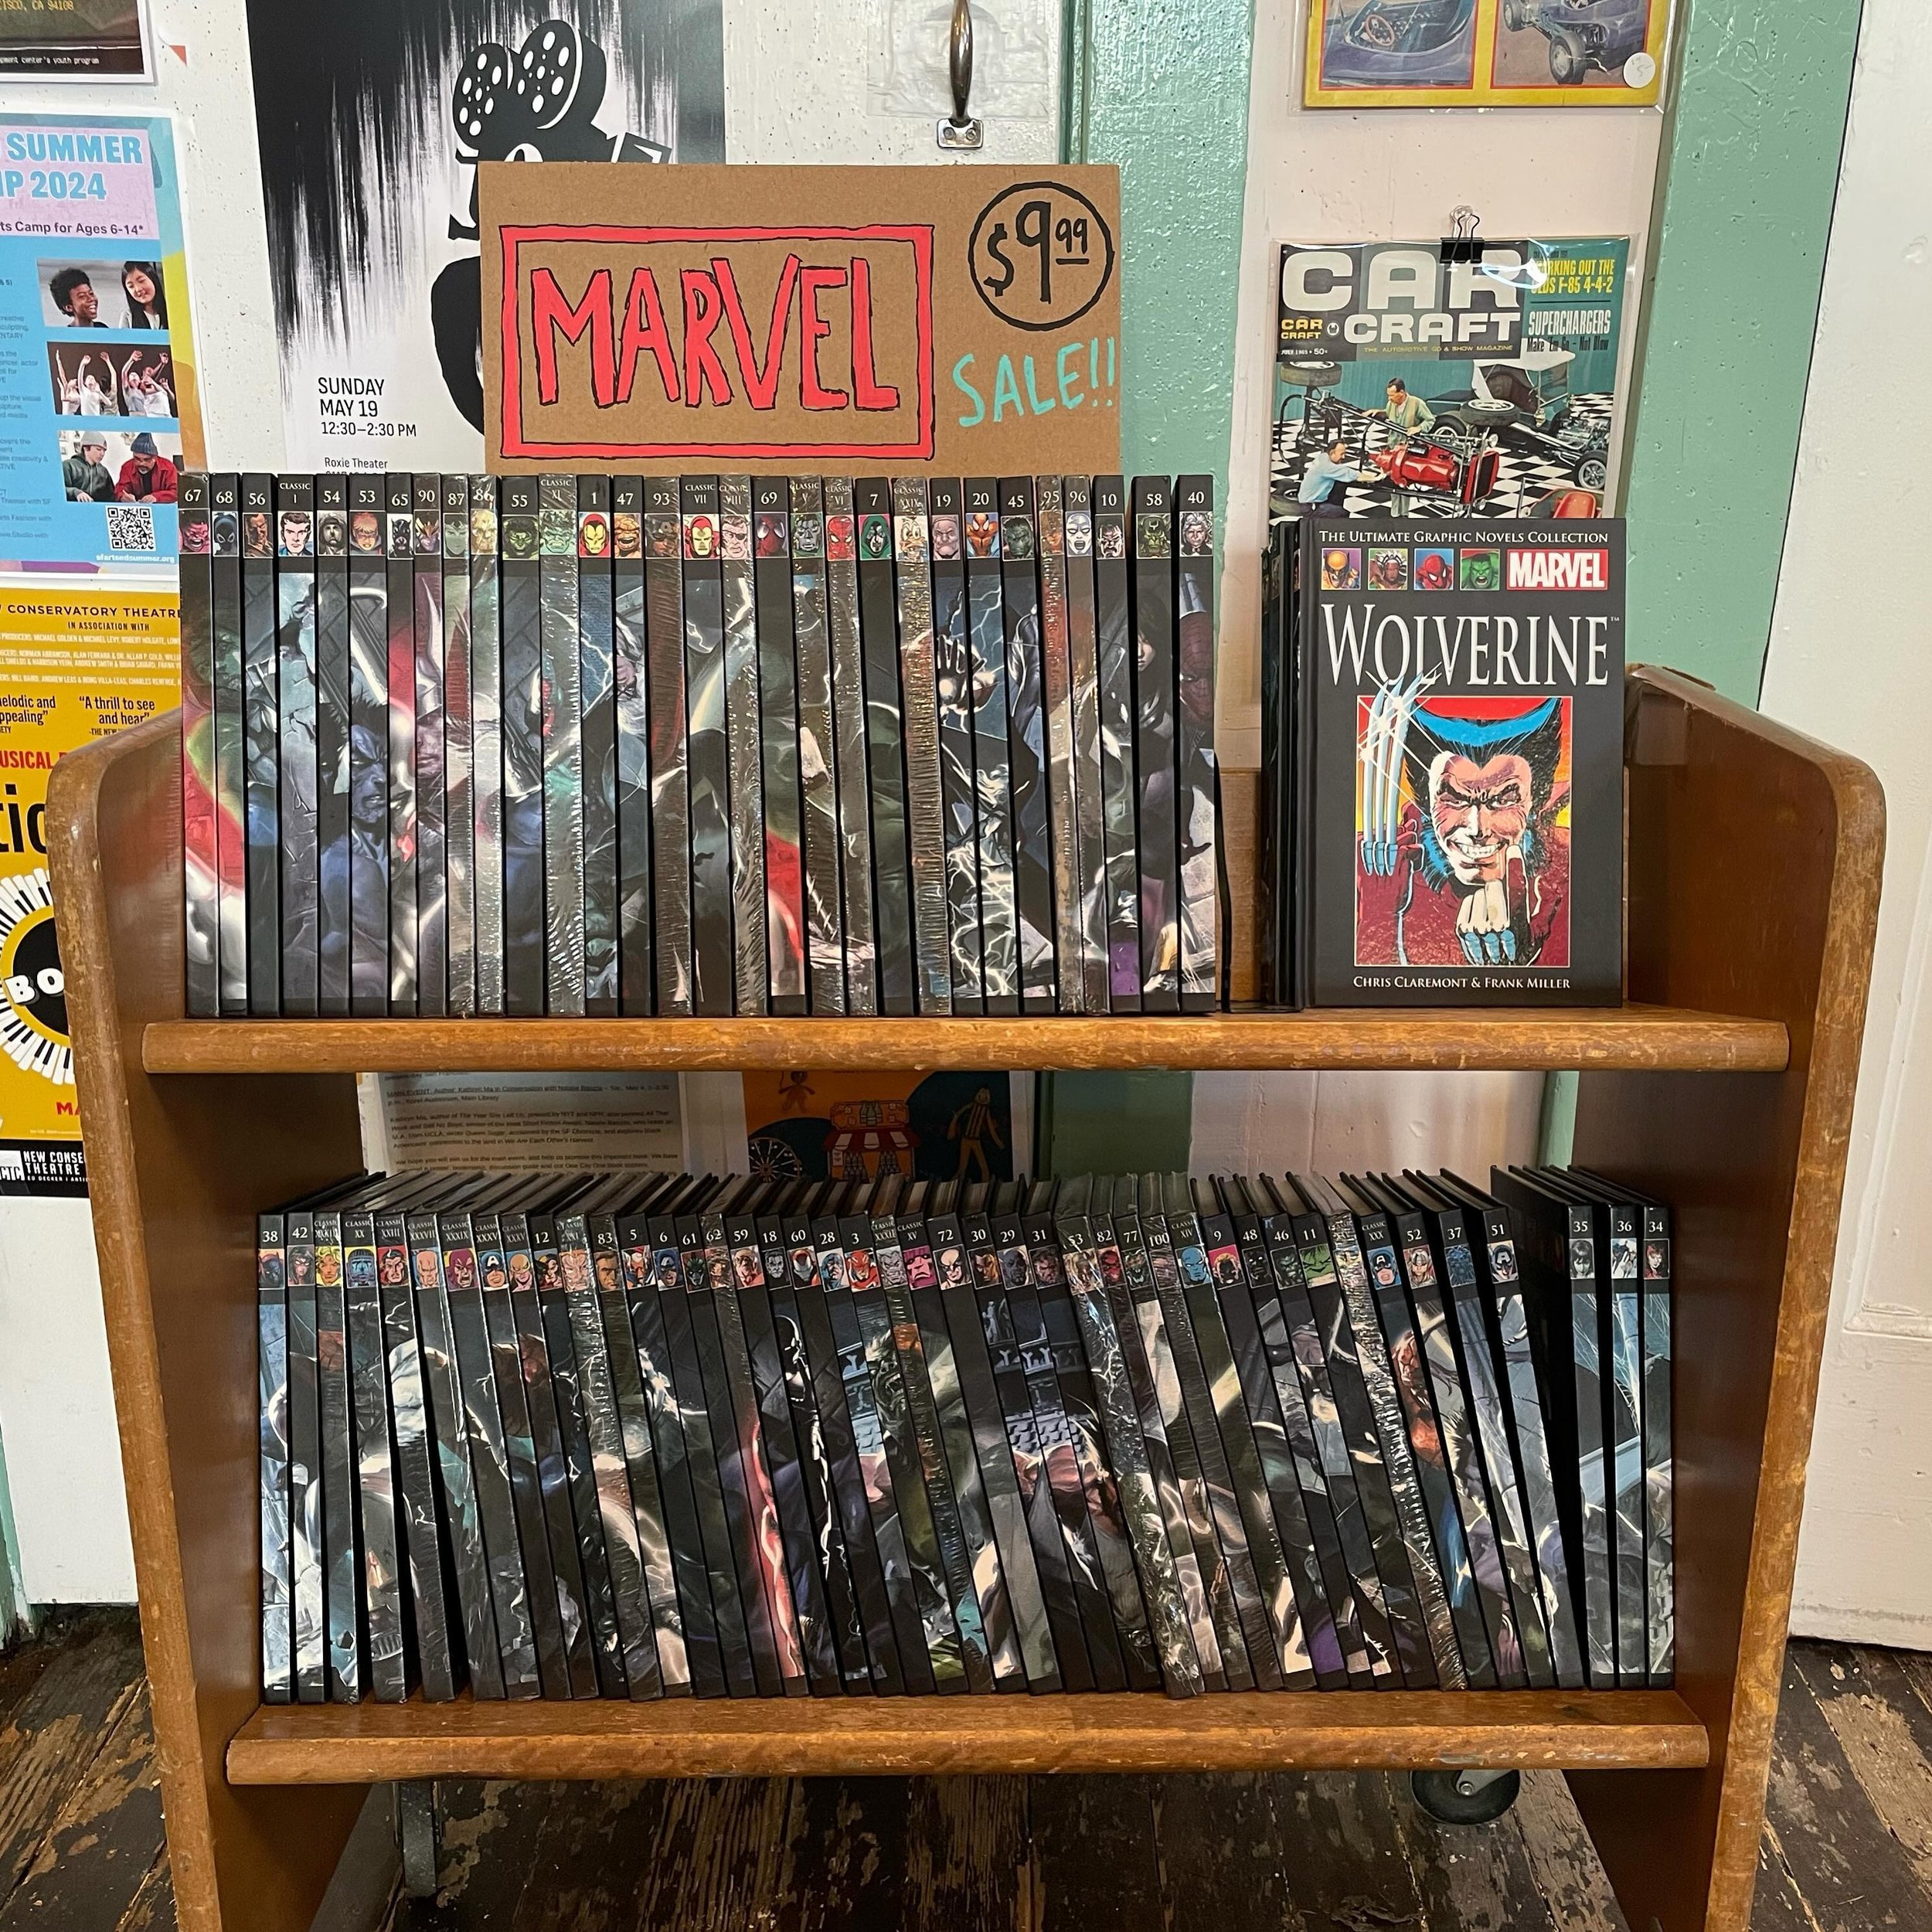 Bub, we&rsquo;ve got some issues! Swing into some sweet savings on this giant collection of marvel hardcovers, only 9.99 each. 🤘🕸️💥